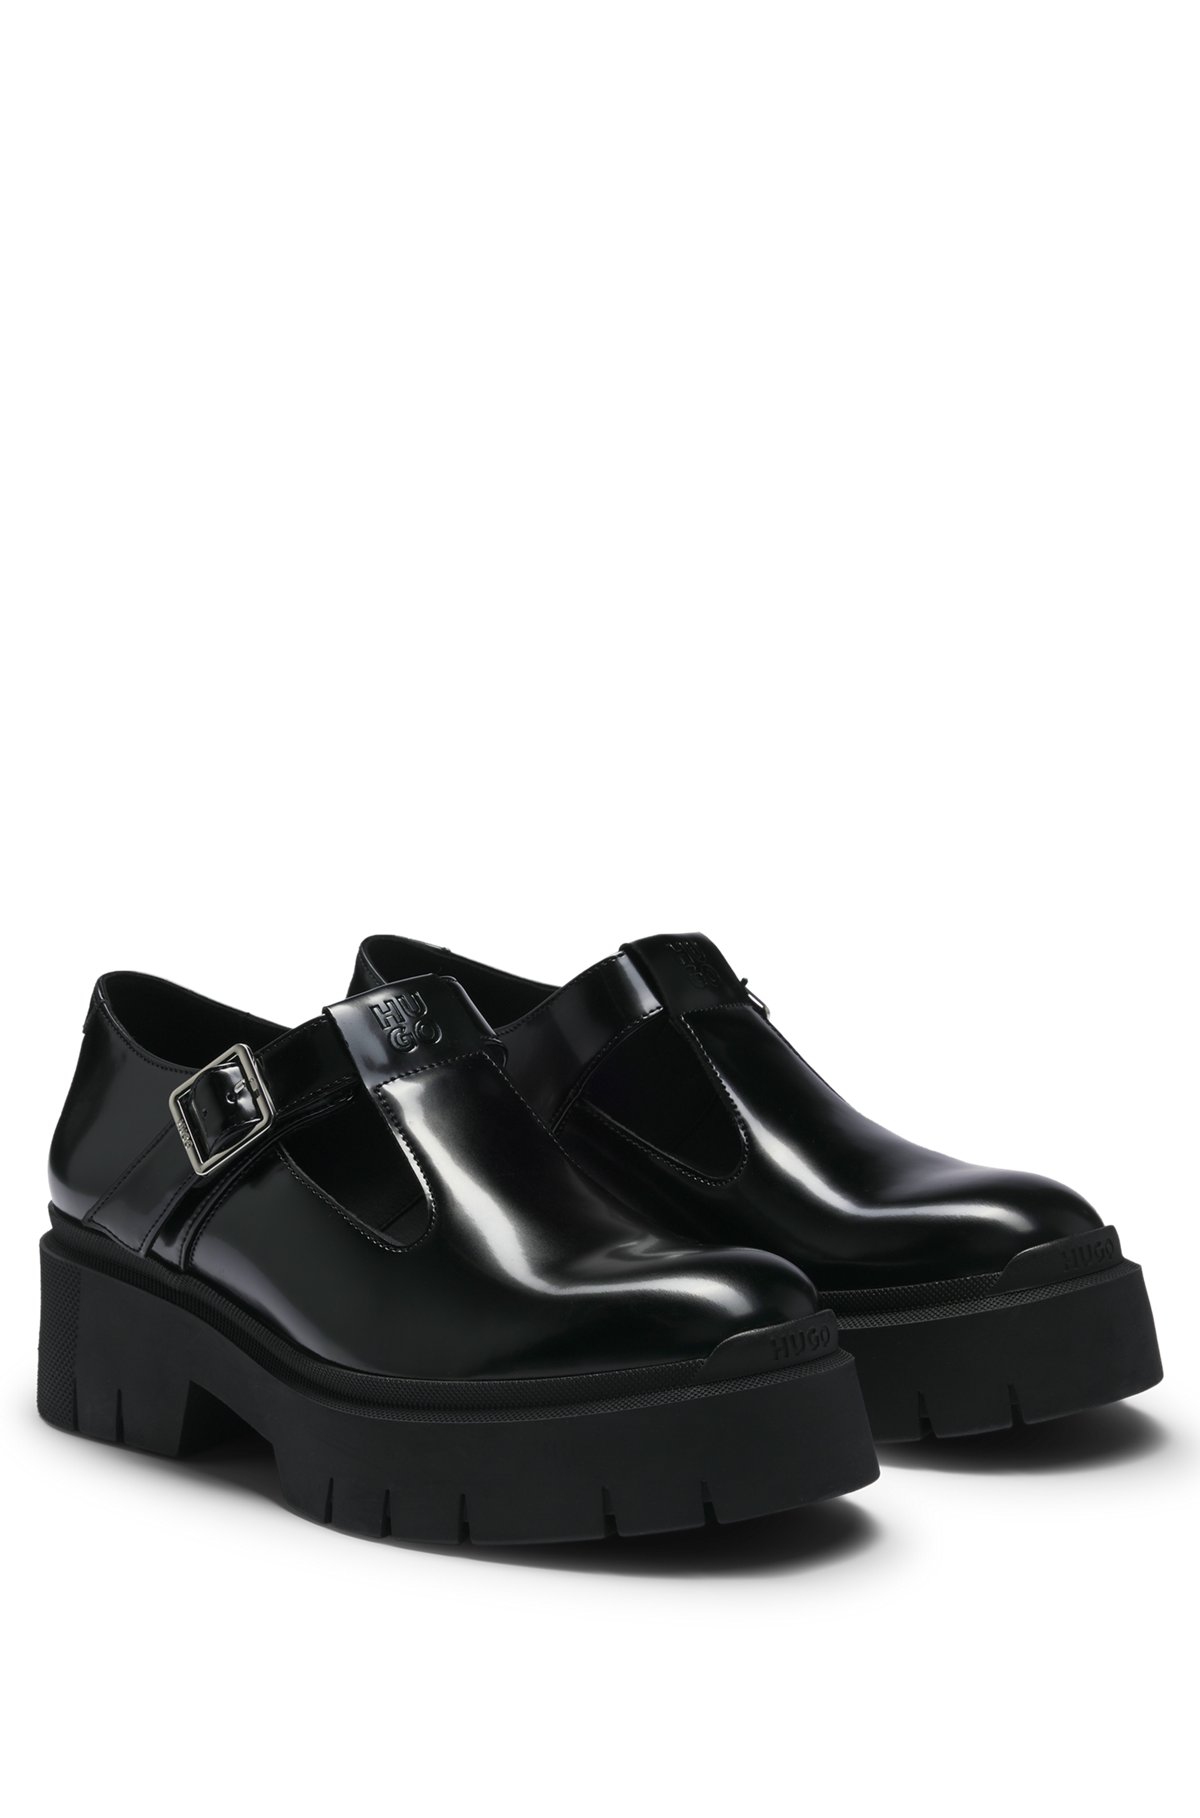 HUGO - Mary-Jane shoes in leather with stacked logo